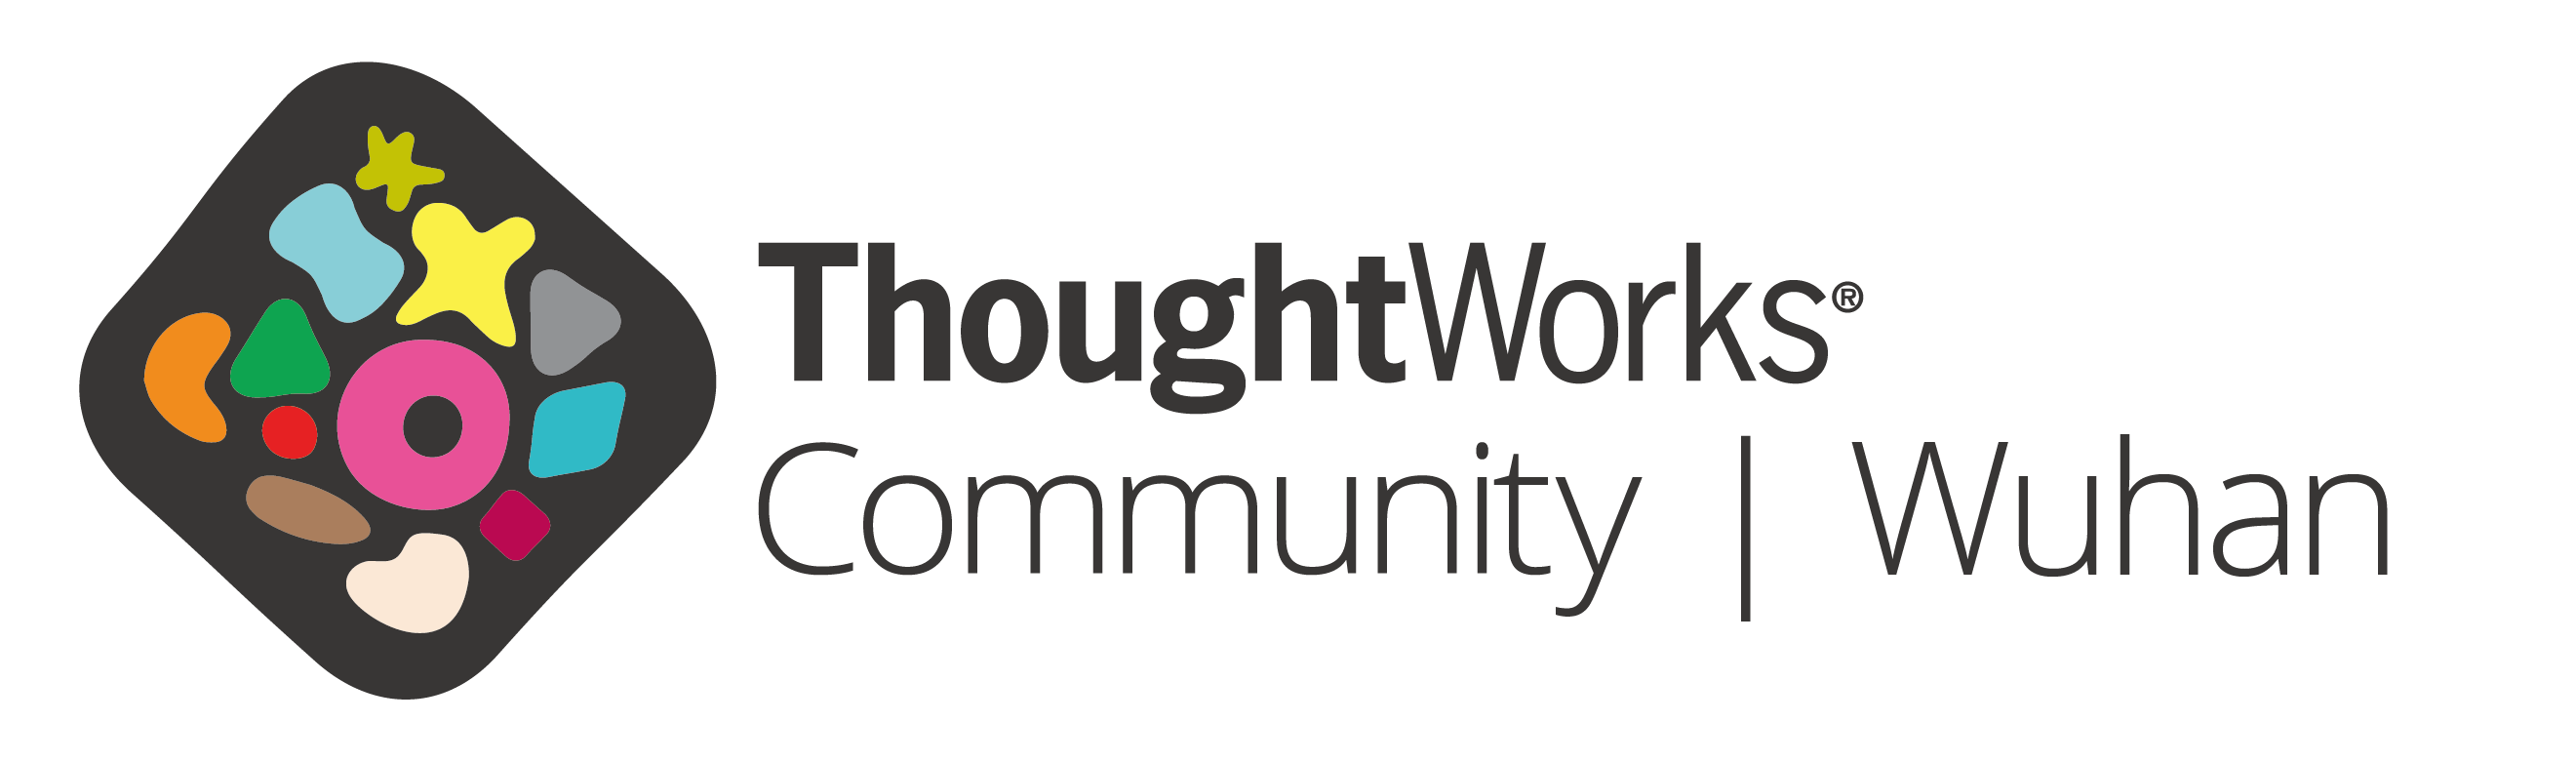 thoughtworks community